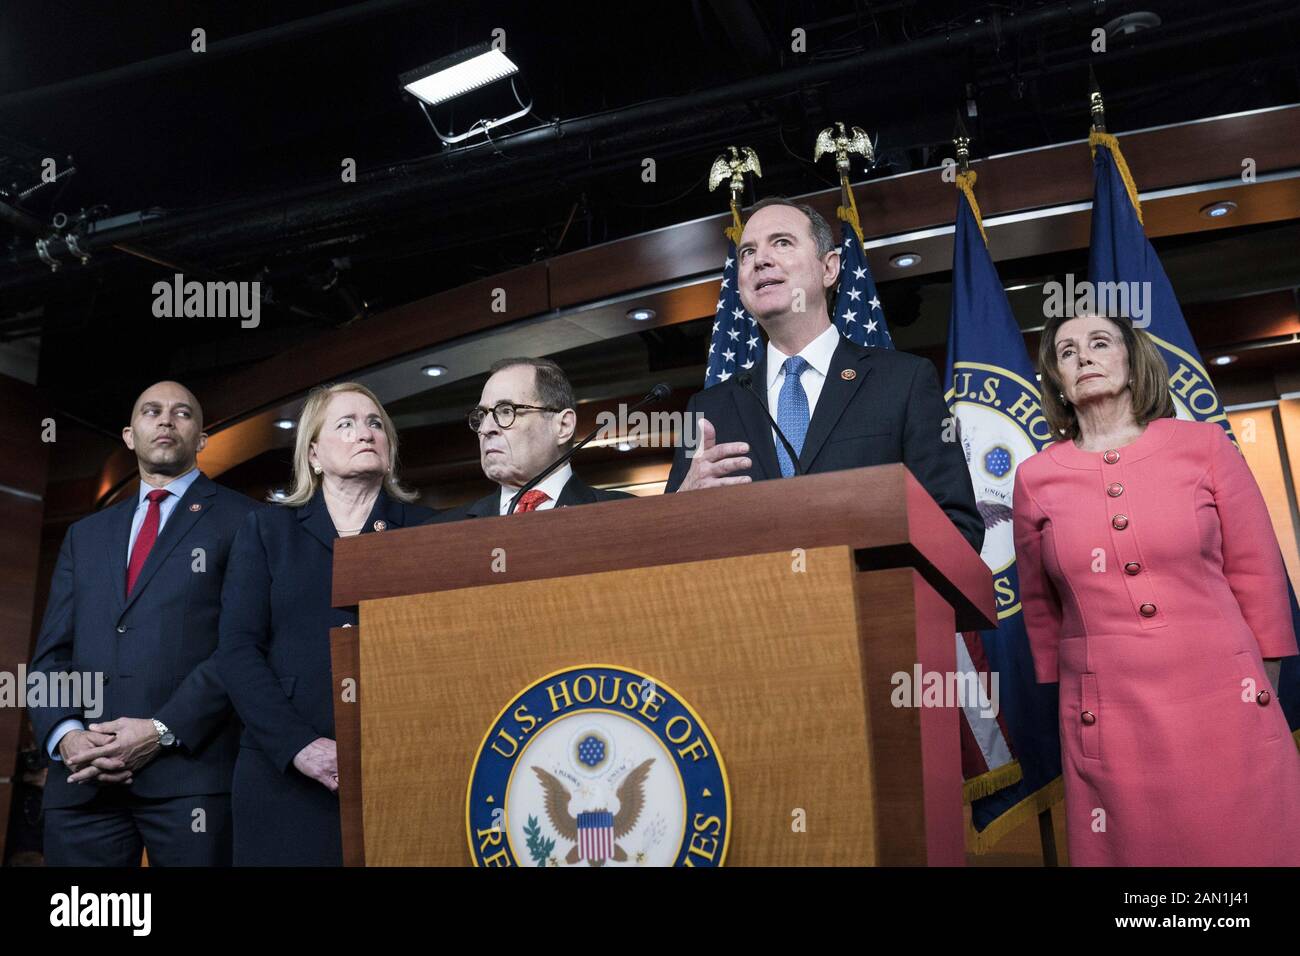 Washington, United States. 15th Jan, 2020. House Intelligence Committee Chairman Adam Schiff, D-Calif., speaks during a press conference with Speaker of the House Nancy Pelosi, D-Calif., held to announce the impeachment managers, members of the House who will serve as prosecutors in the Senate impeachment trial of President Trump, in the the U.S. Capitol Building in Washington, DC on Wednesday, January 15, 2020. Credit: UPI/Alamy Live News Stock Photo